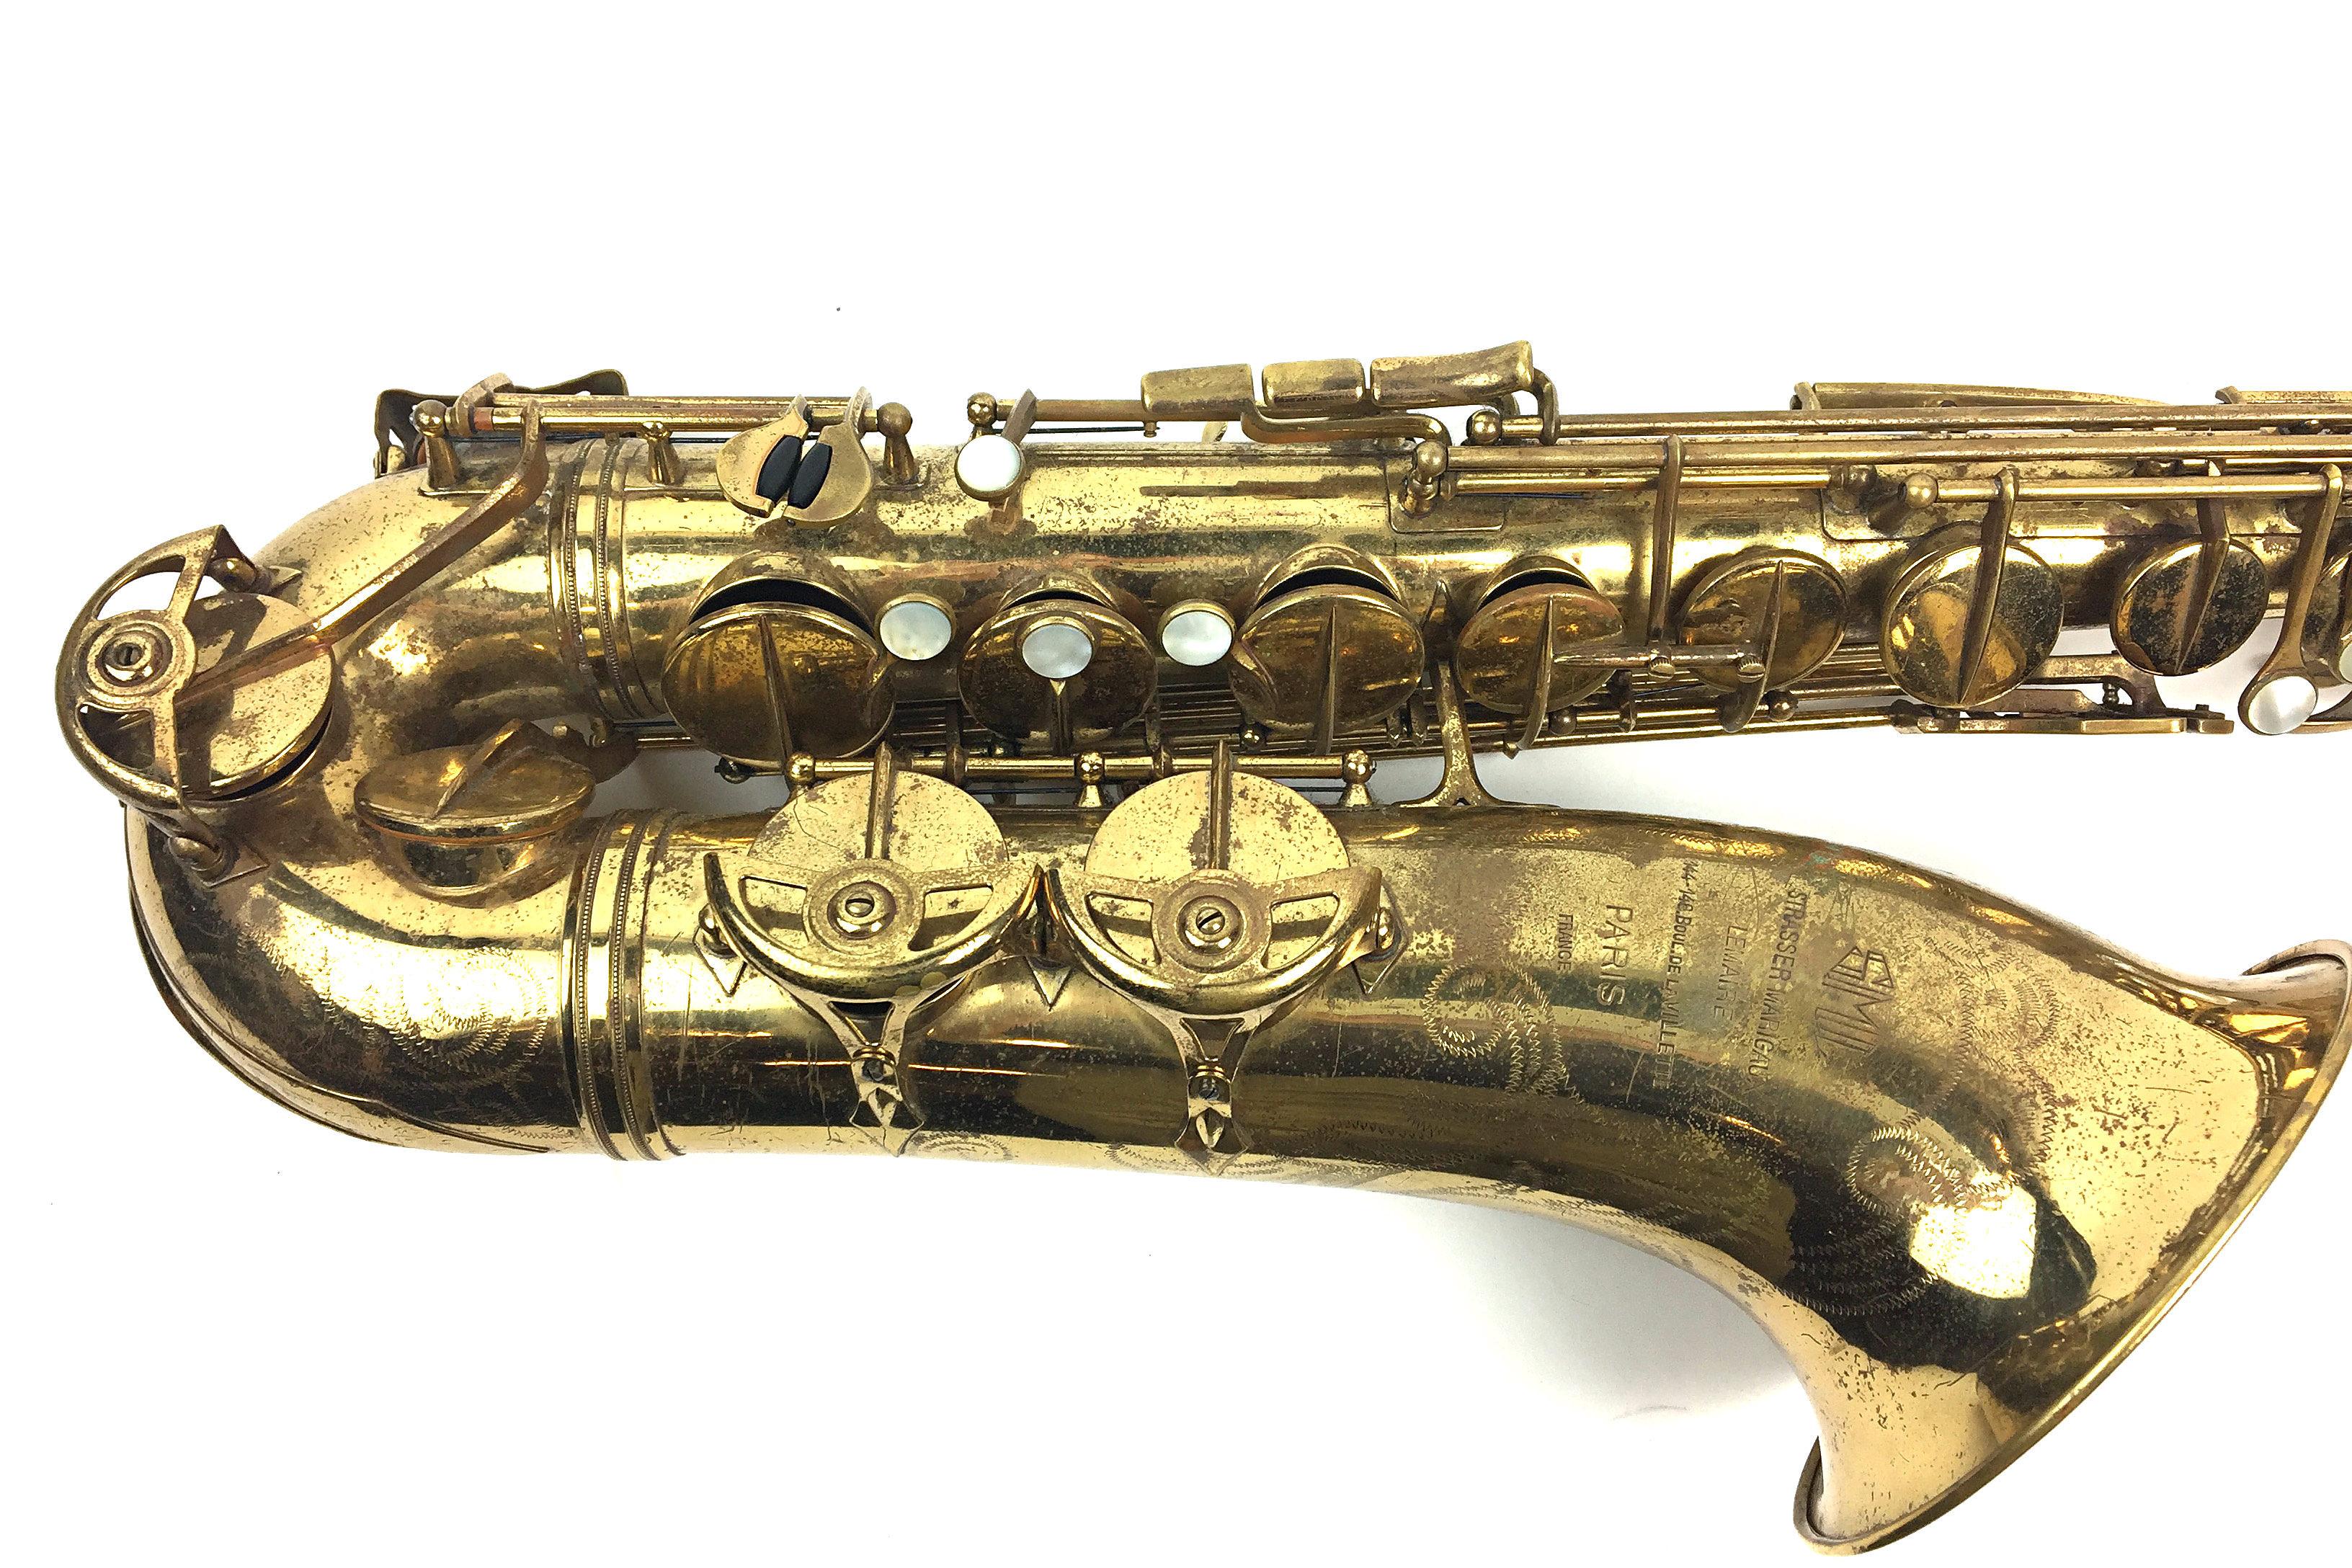 sml alto saxophone serial numbers